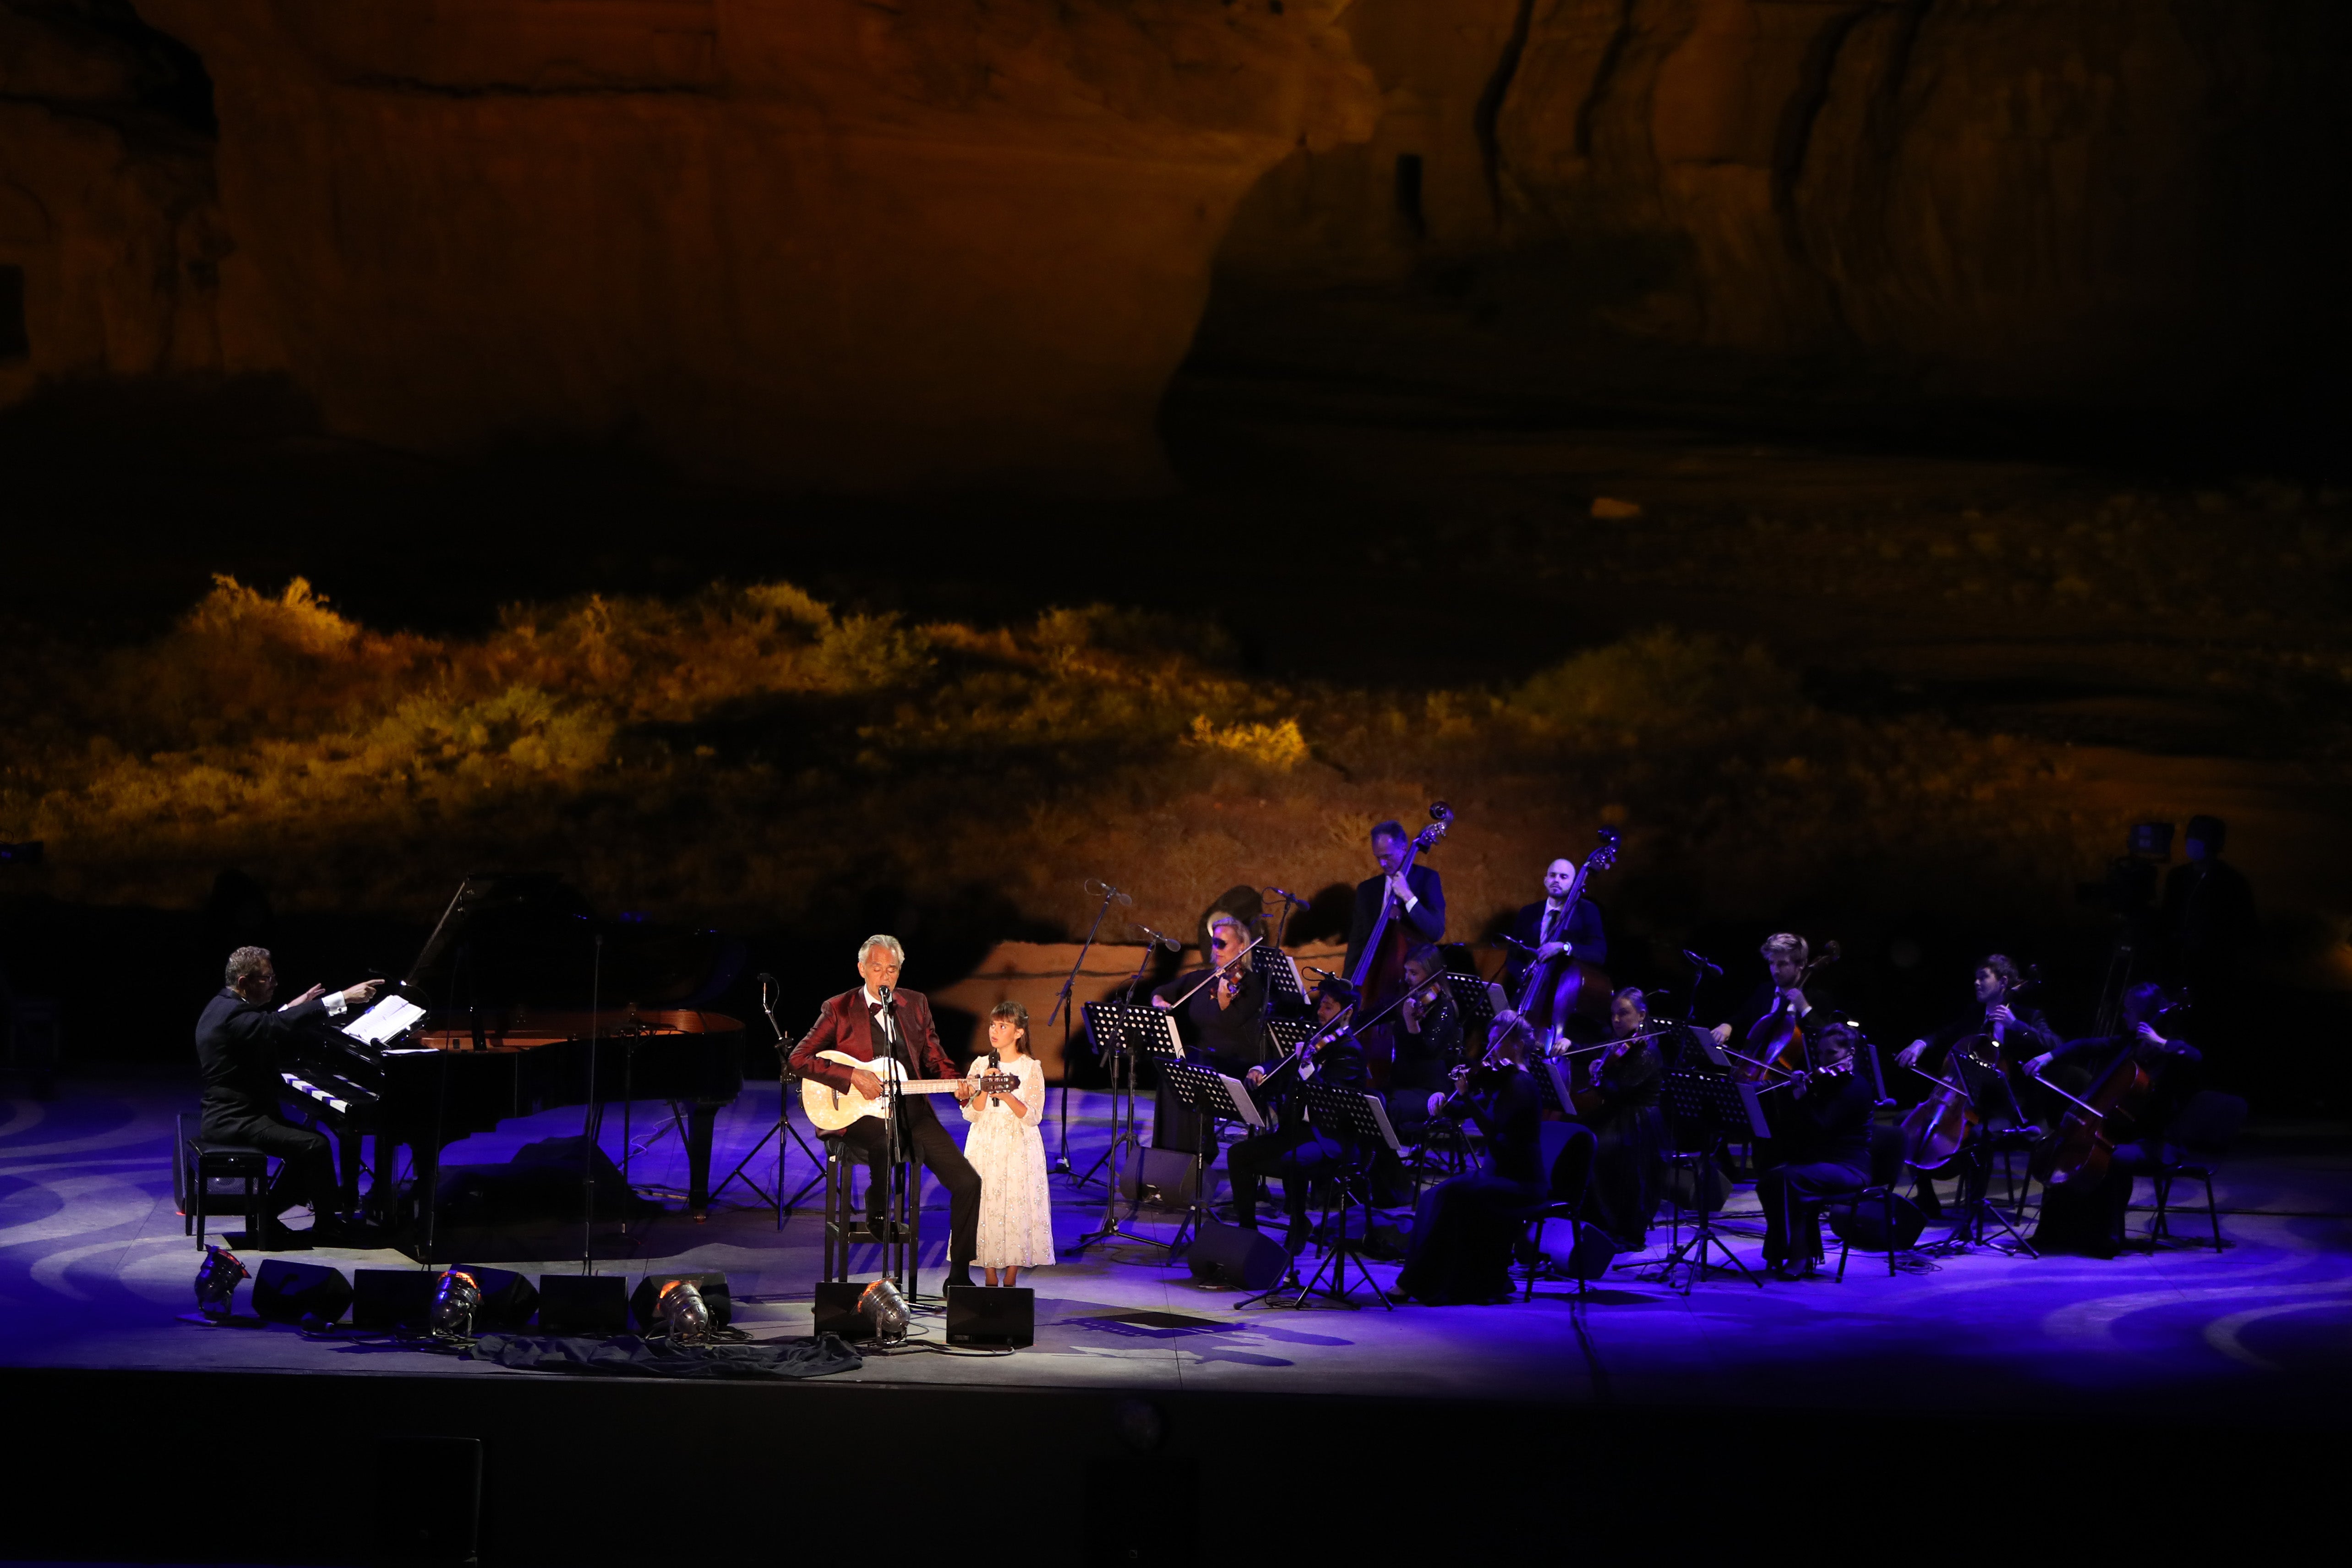 Andrea Bocelli performs at World Heritage site Hegra